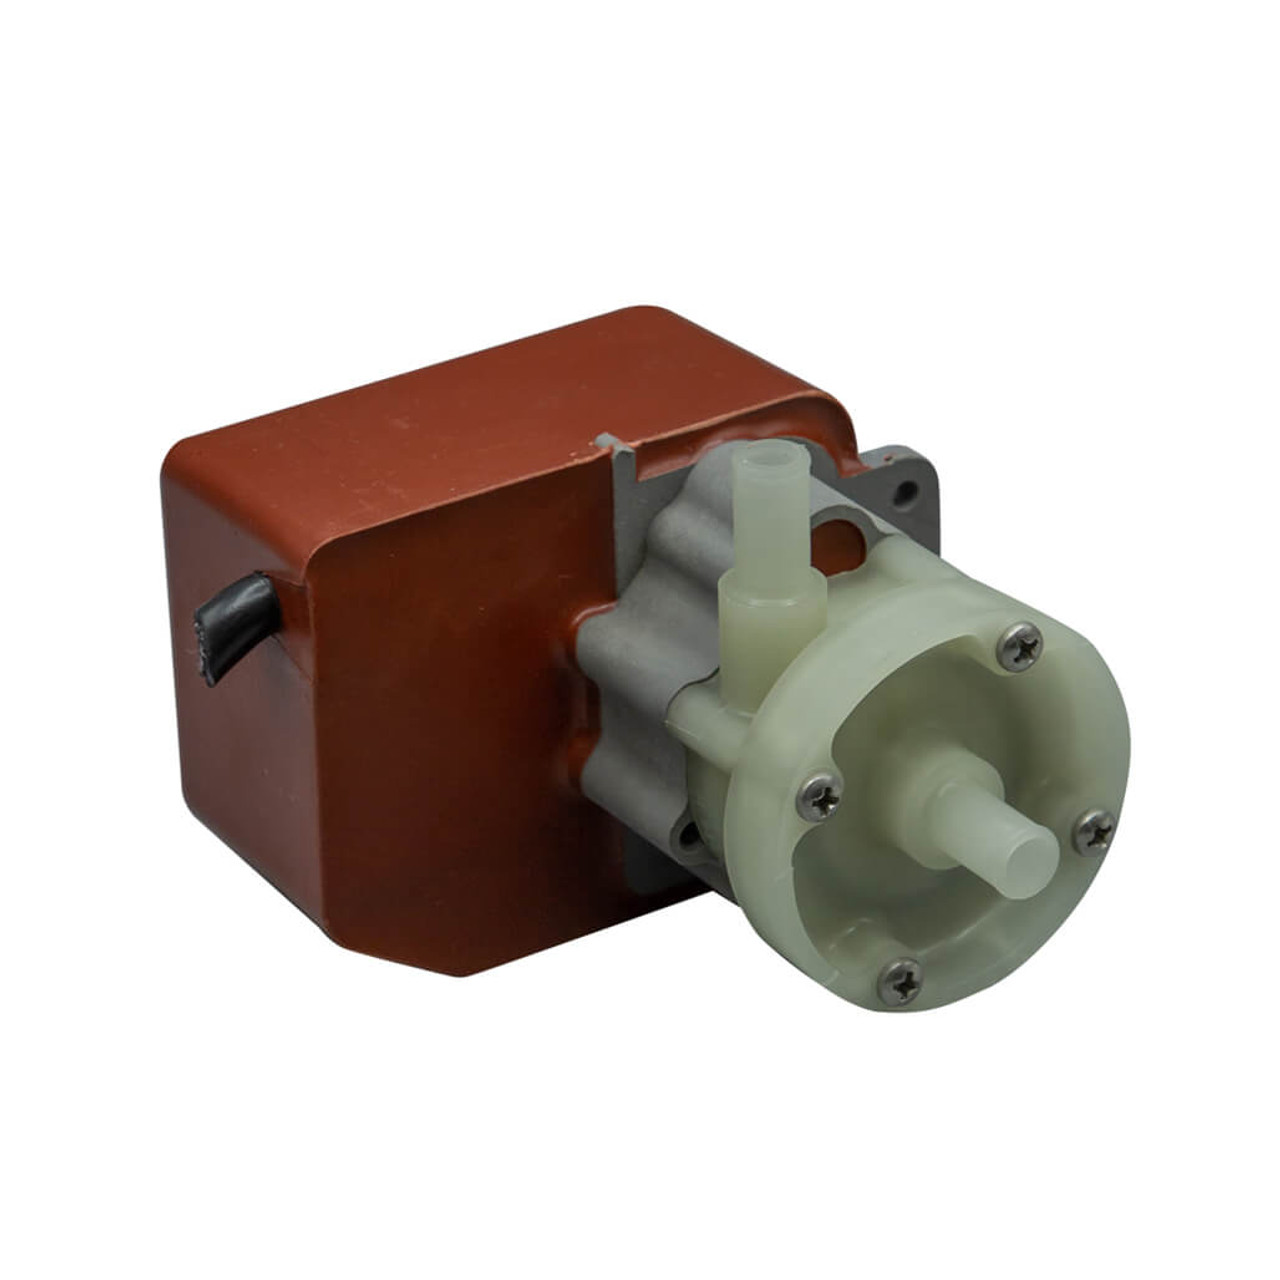 March Pumps - 1A-MD-3/8 230V, Submersible and Open Air Magnetic Drive Pump - 0115-0007-0600